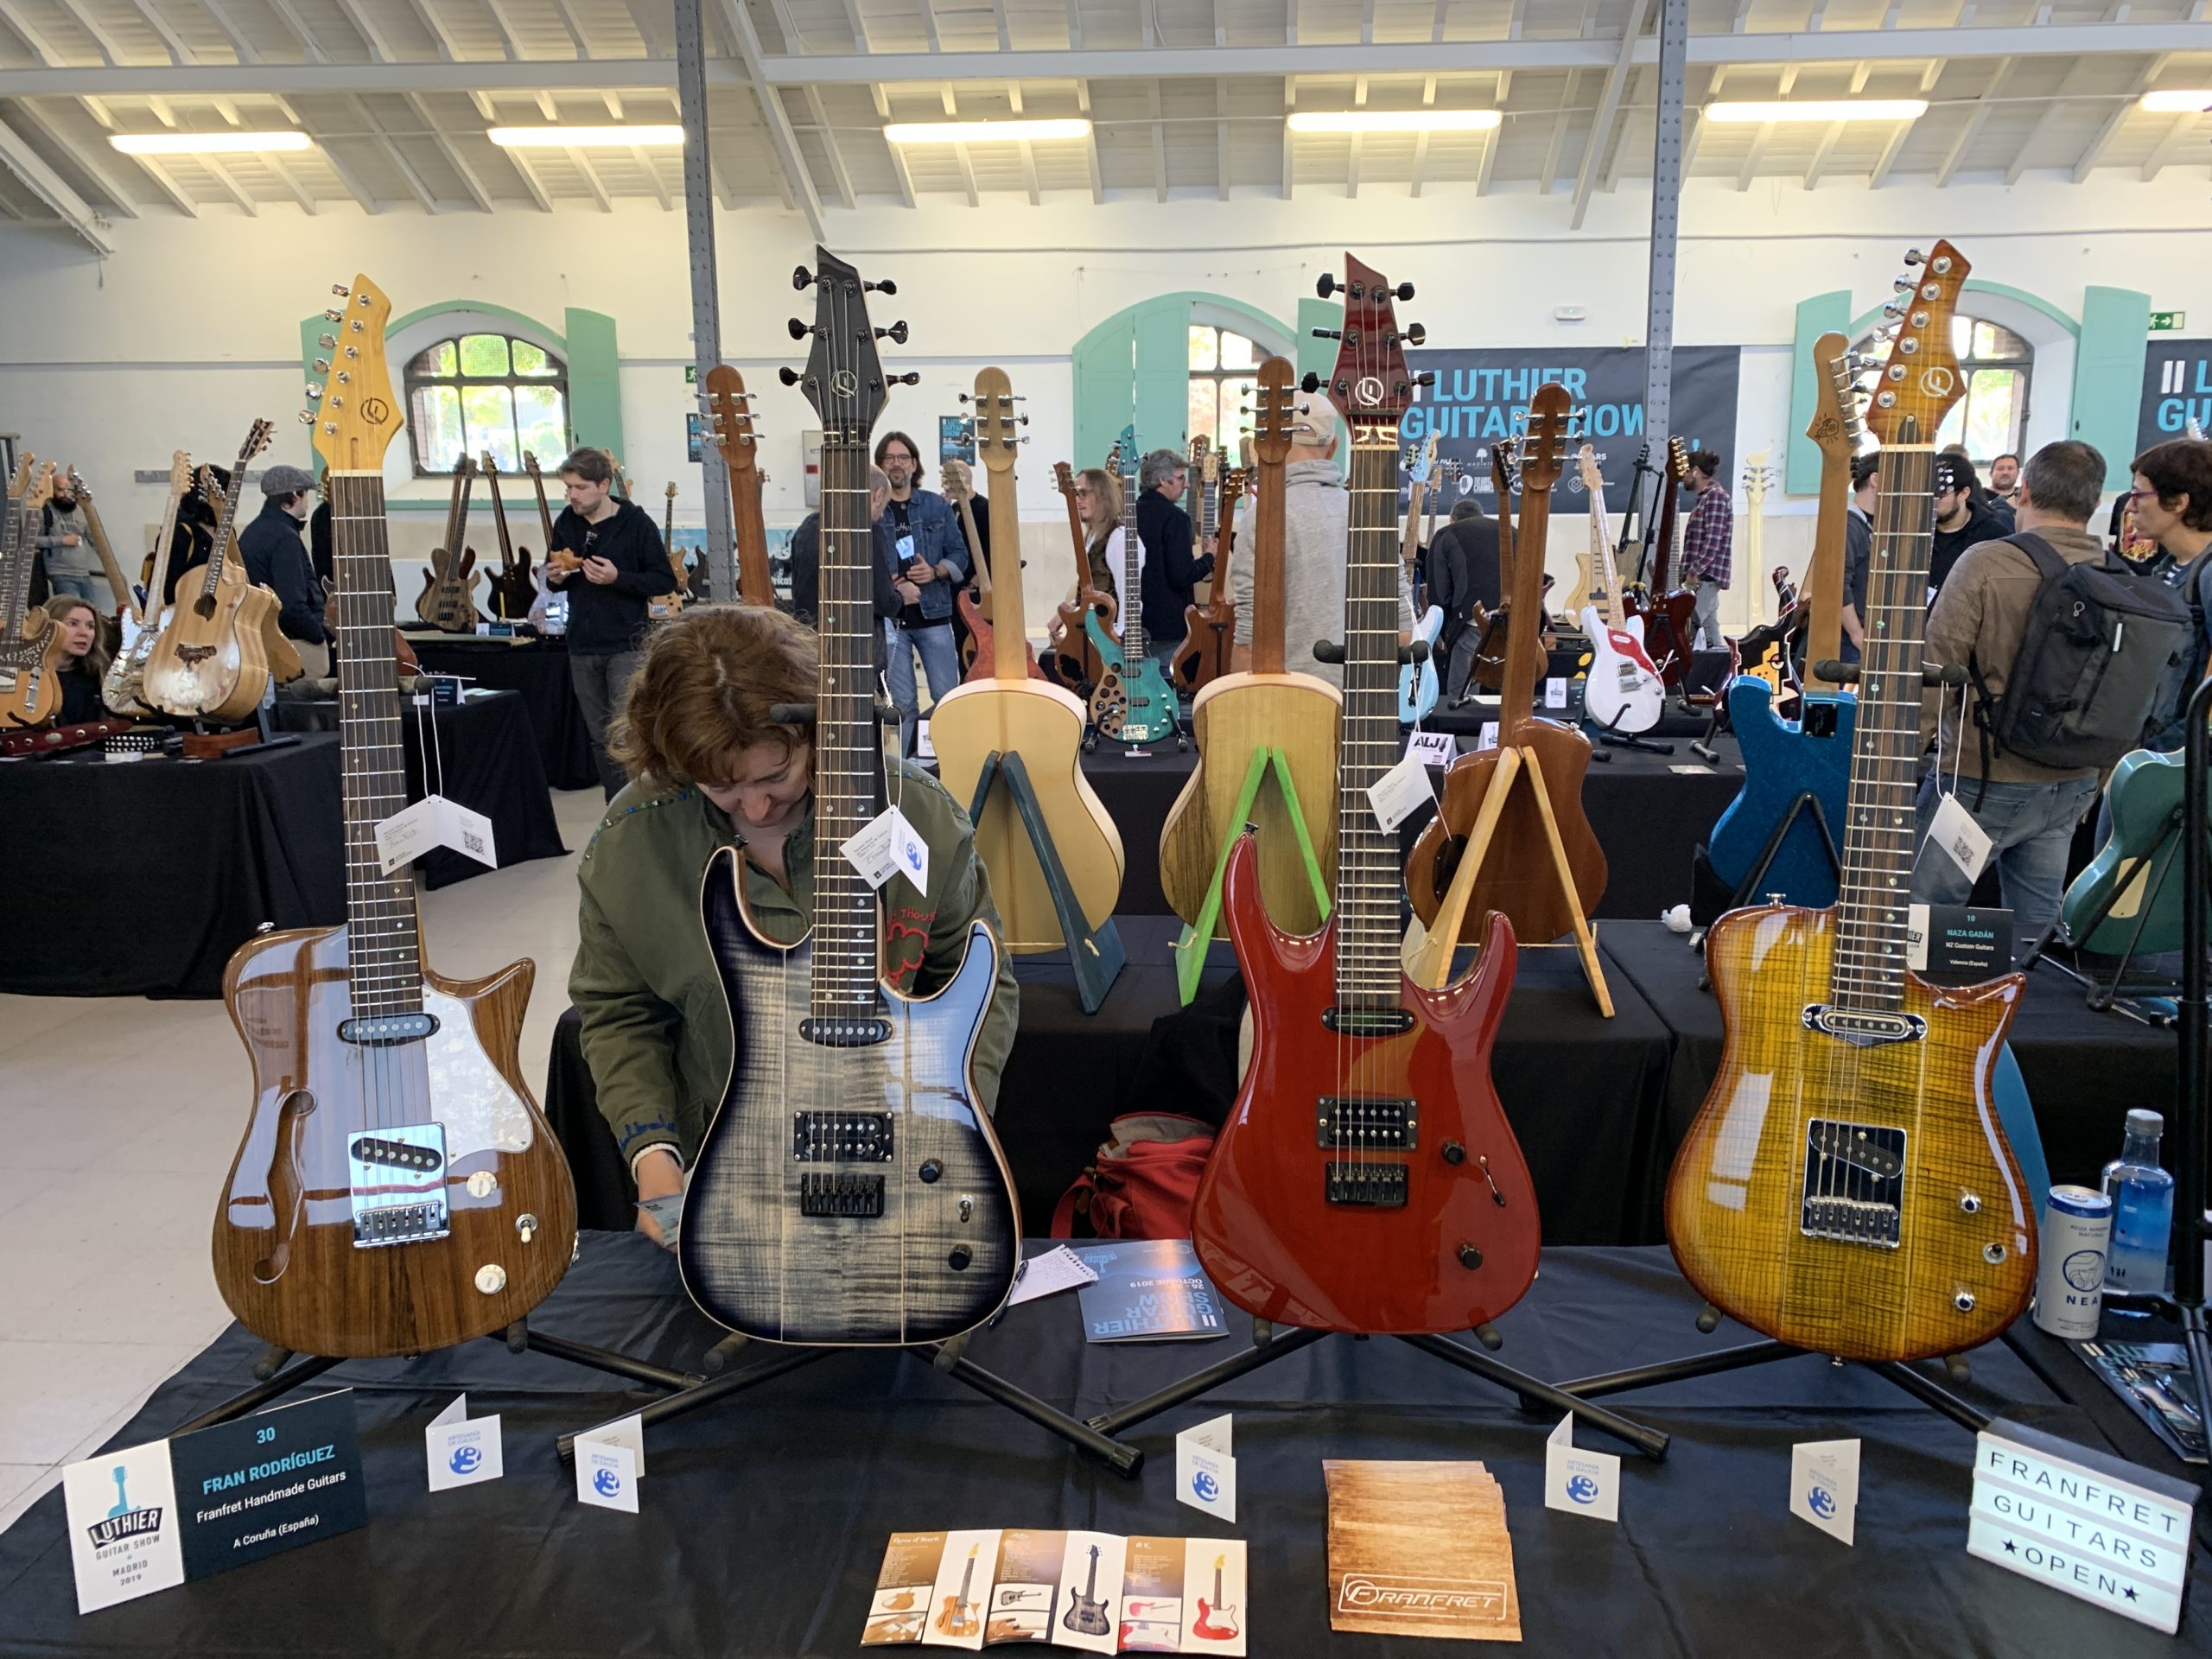 Madrid Luthier Guitar Show - Video report for day 1